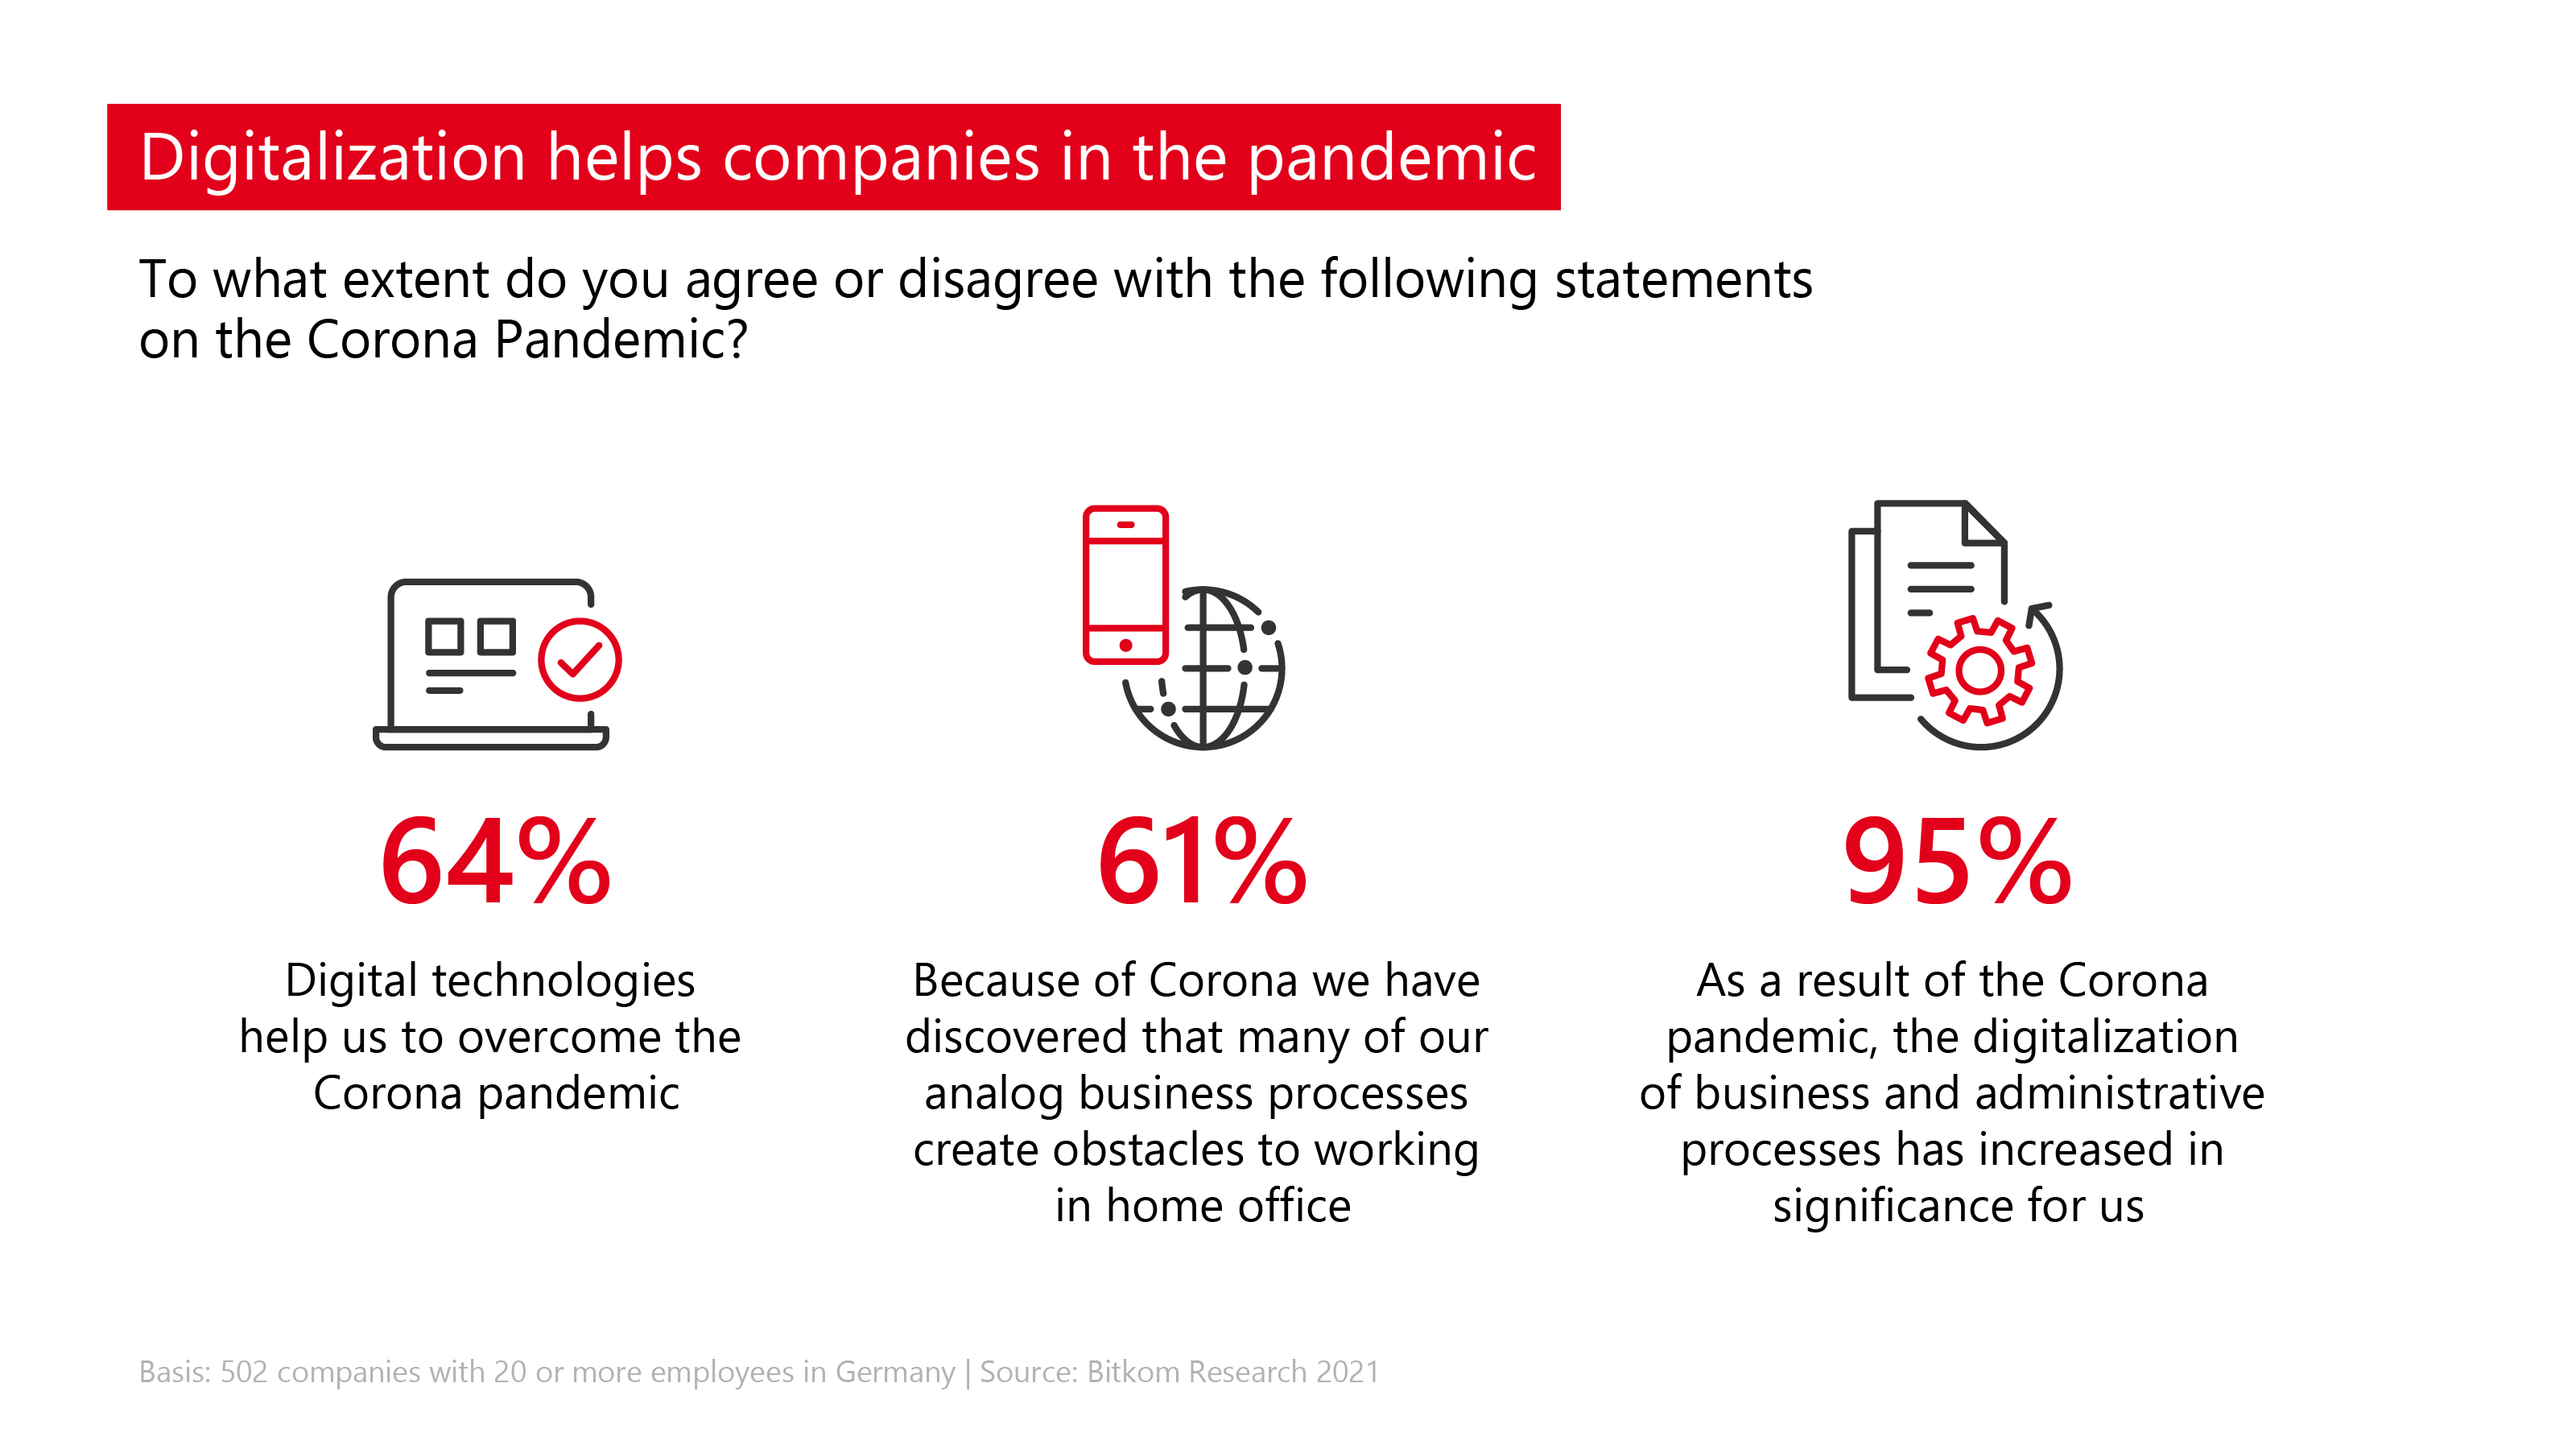 Digitalization helps companies in the pandemic